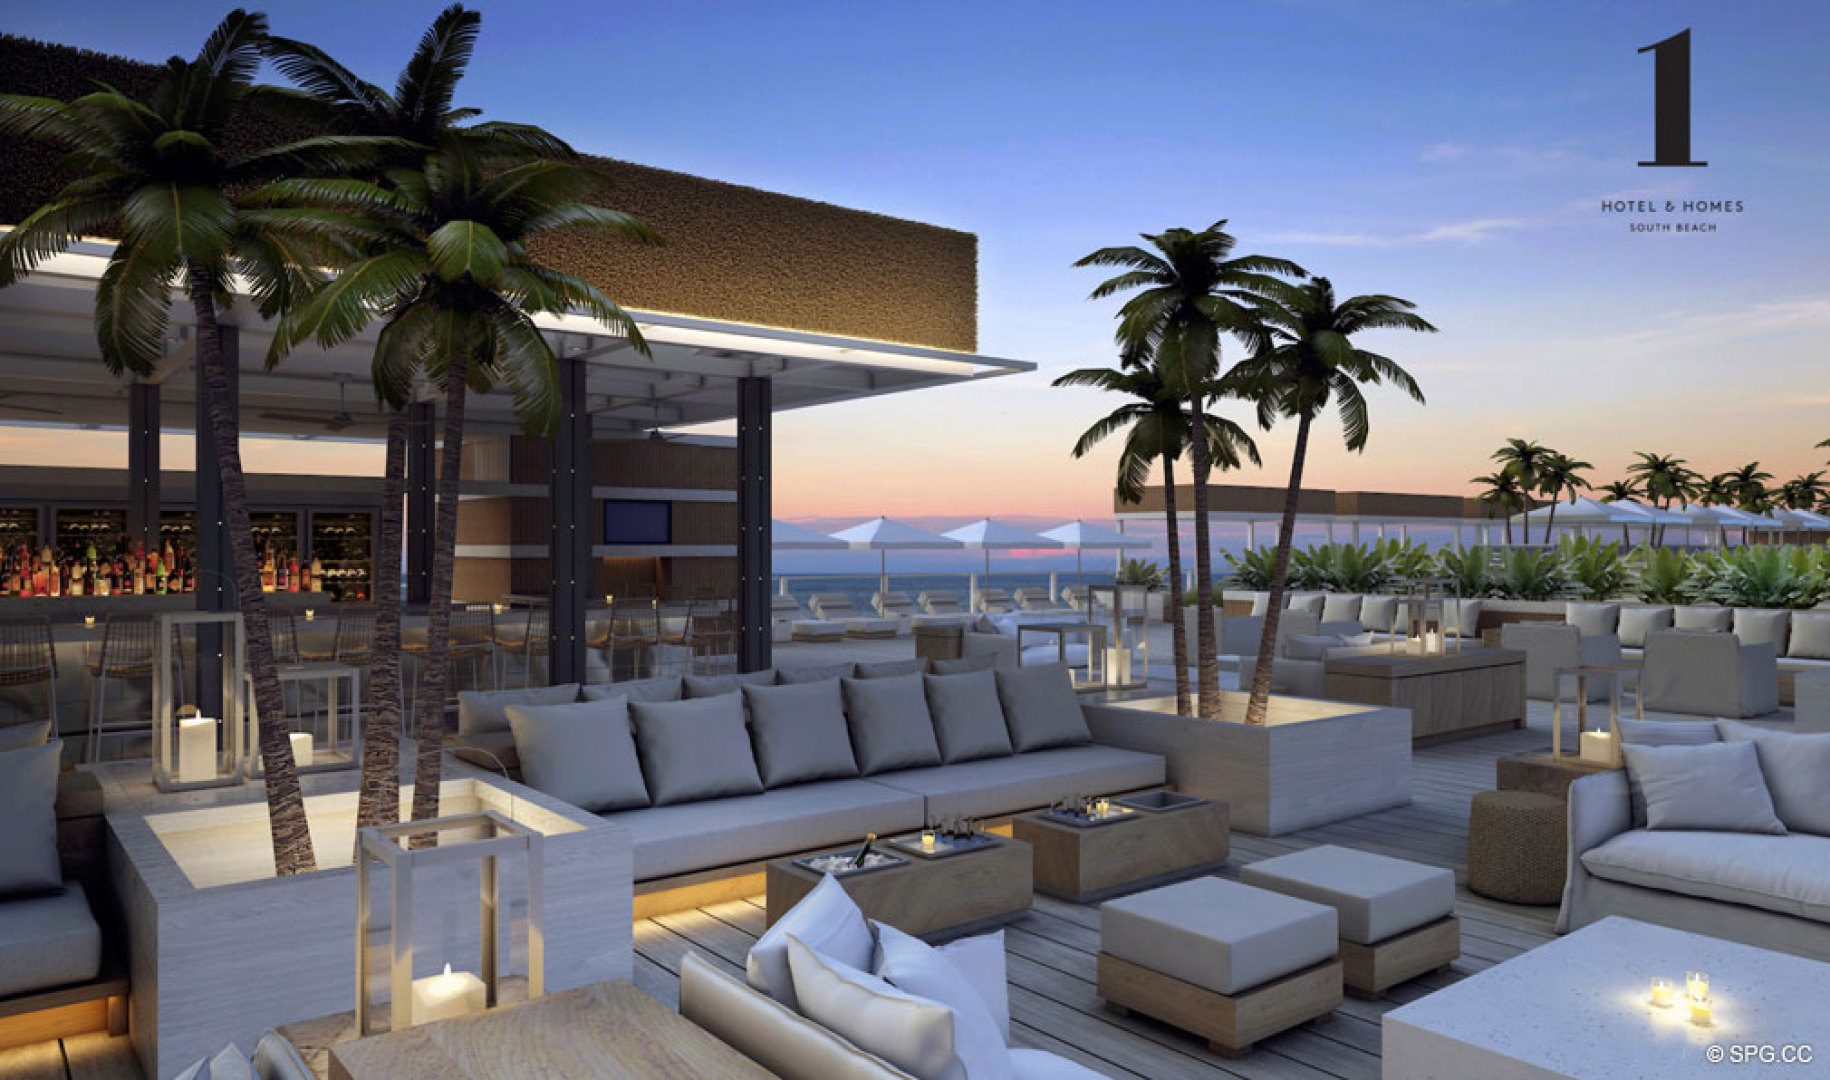 Beachfront Lounge at 1 Hotel & Homes South Beach, Luxury Oceanfront Condominiums Located at 2399 Collins Ave, Miami Beach, FL 33139